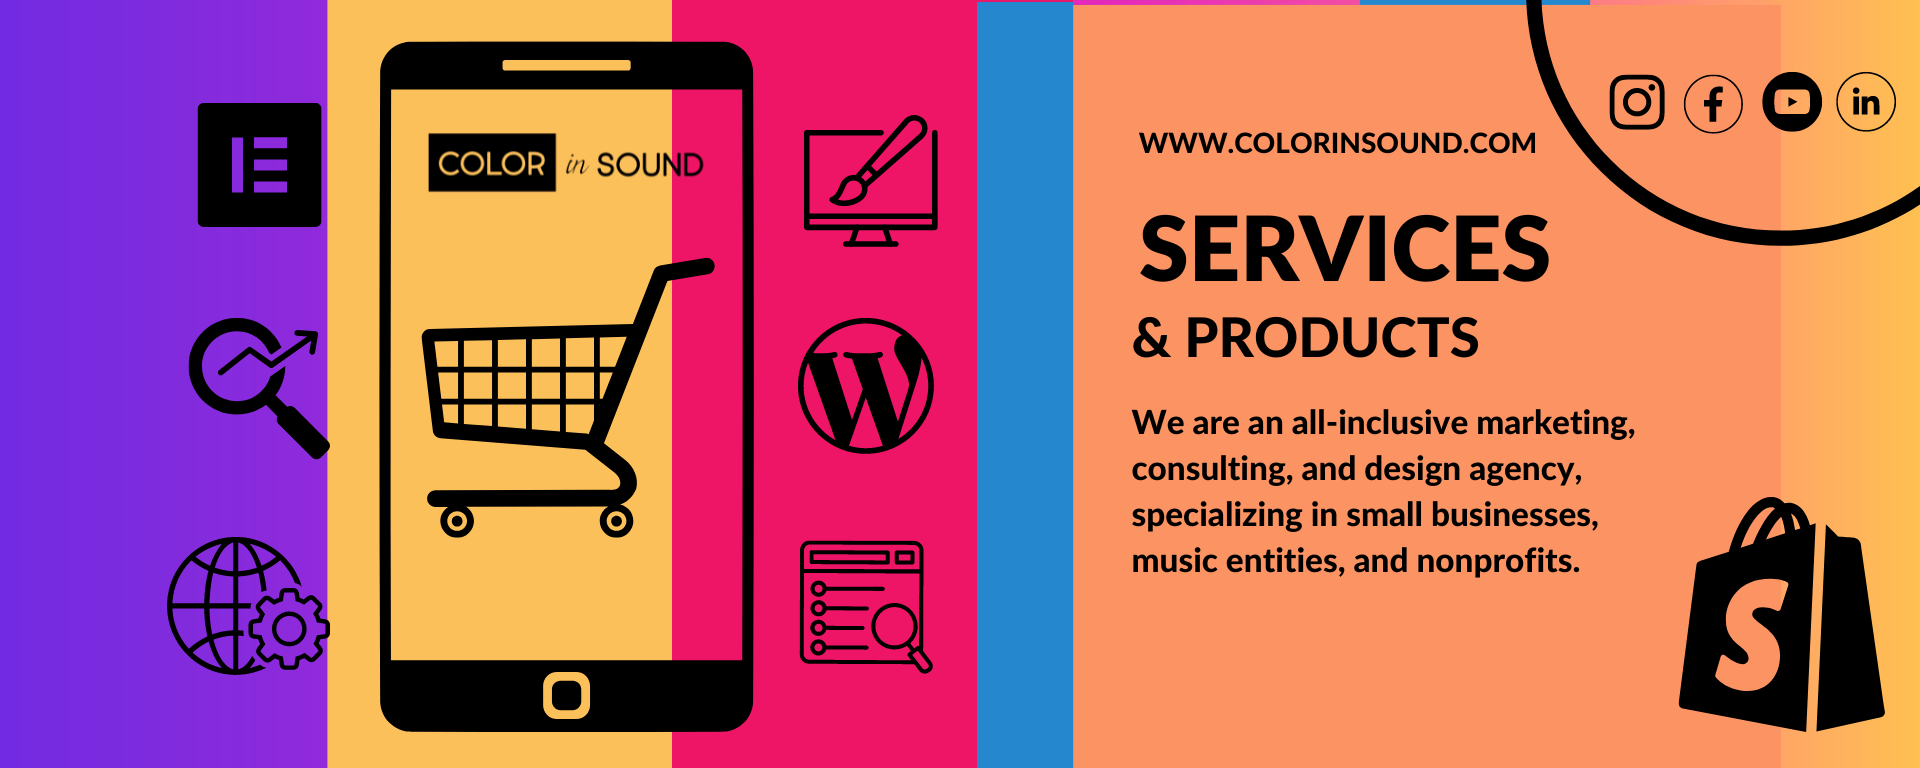 Color-In-Sound-Dover-New-Hampshire-Marketing-Agency-Shop-Page-Banner